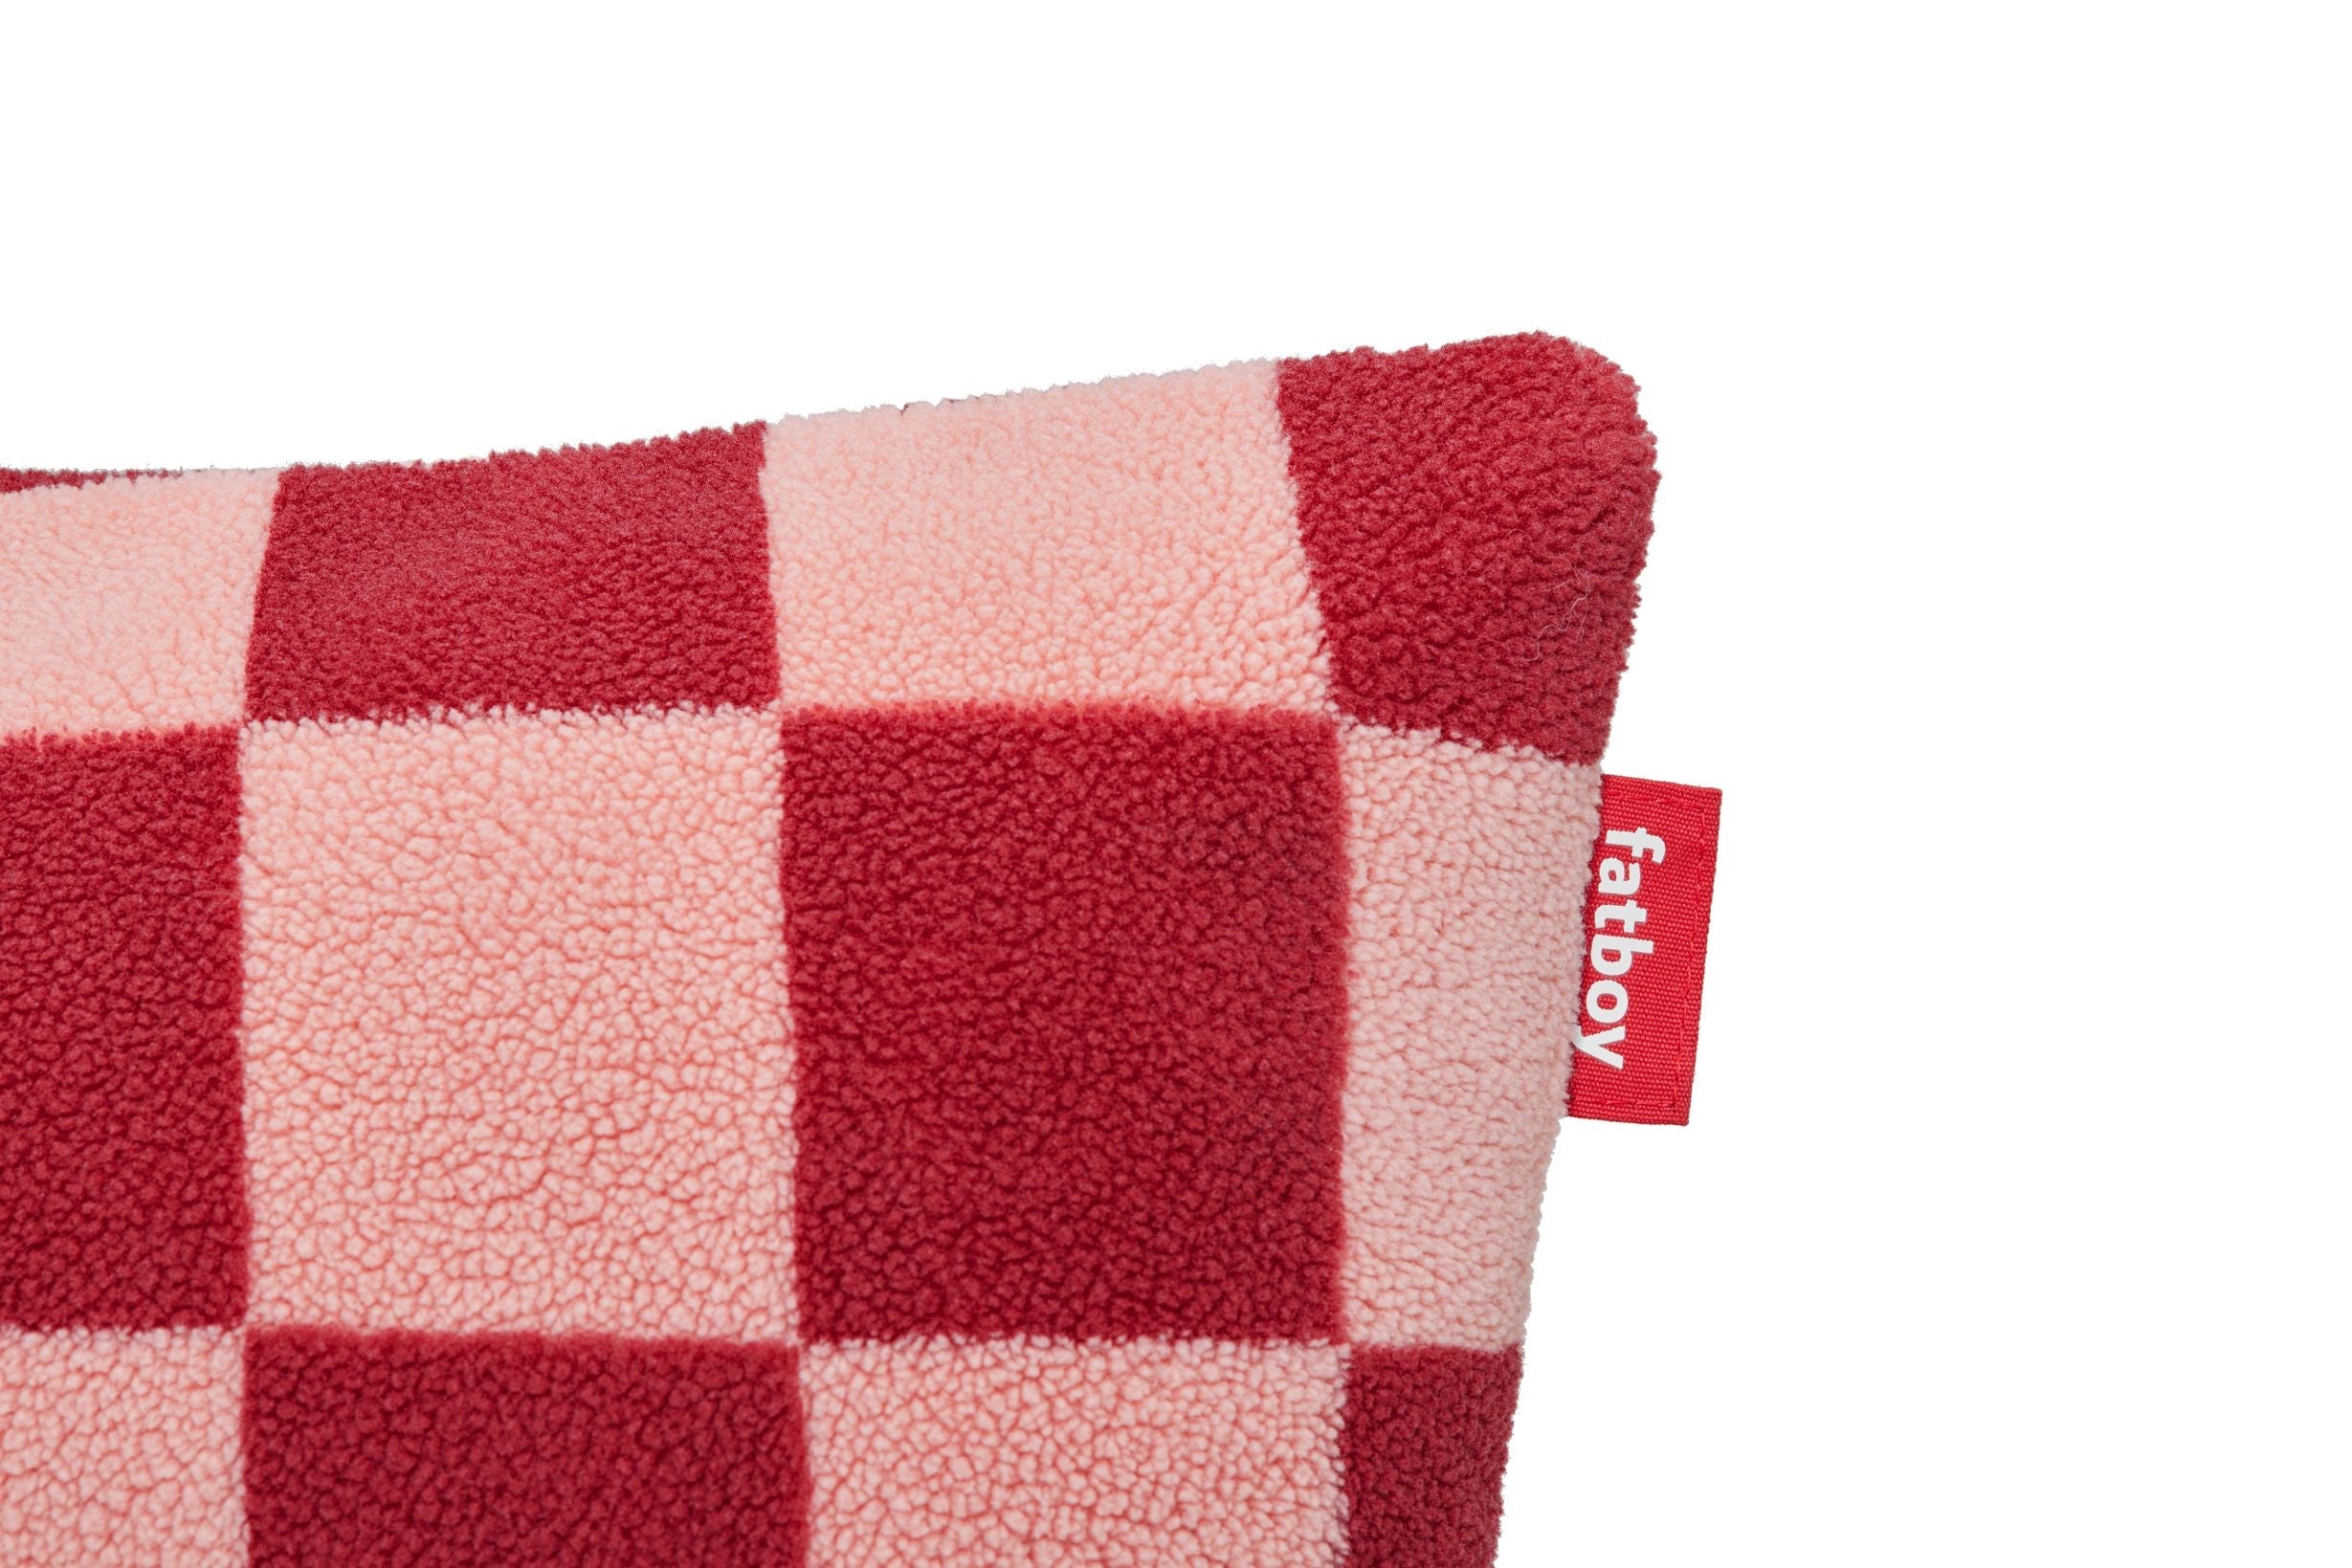 Fatboy Square Pillow Teddy Chess, Red